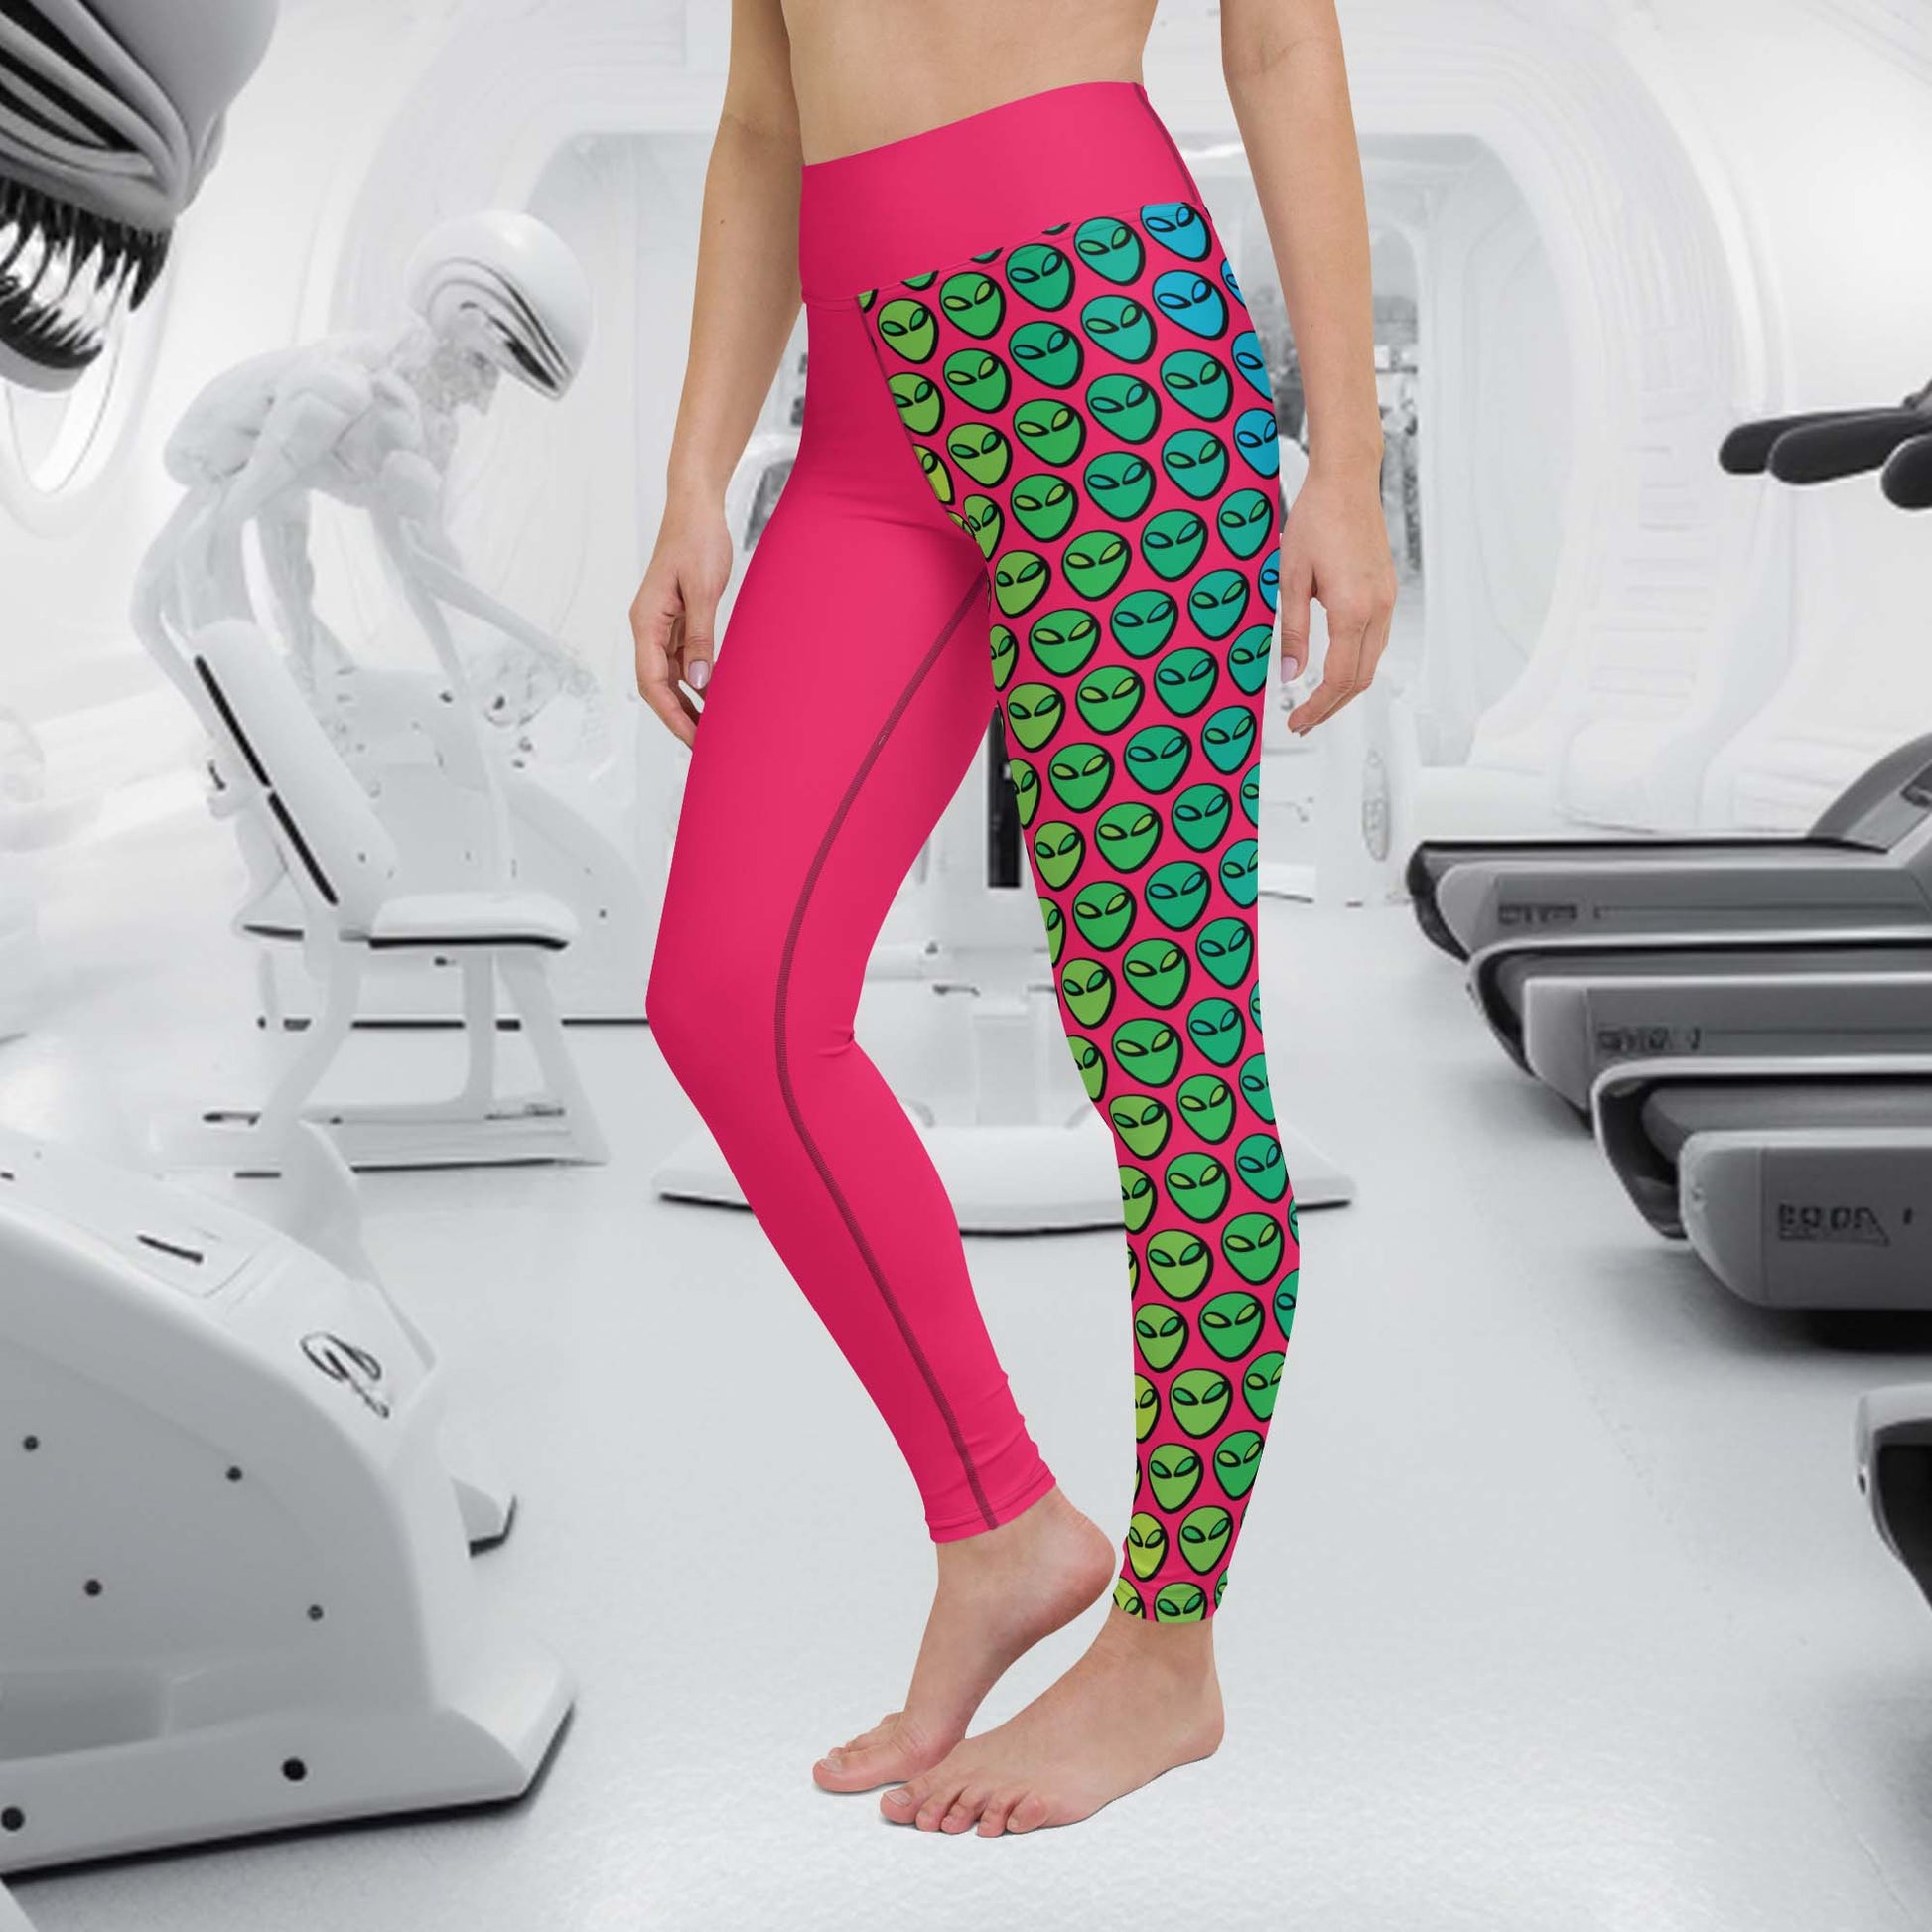 #WEIRDO | Alien leggings or sport pants for alien freaks! Are you fan of aliens and believe that they exist? This is the perfect yoga legging for you!